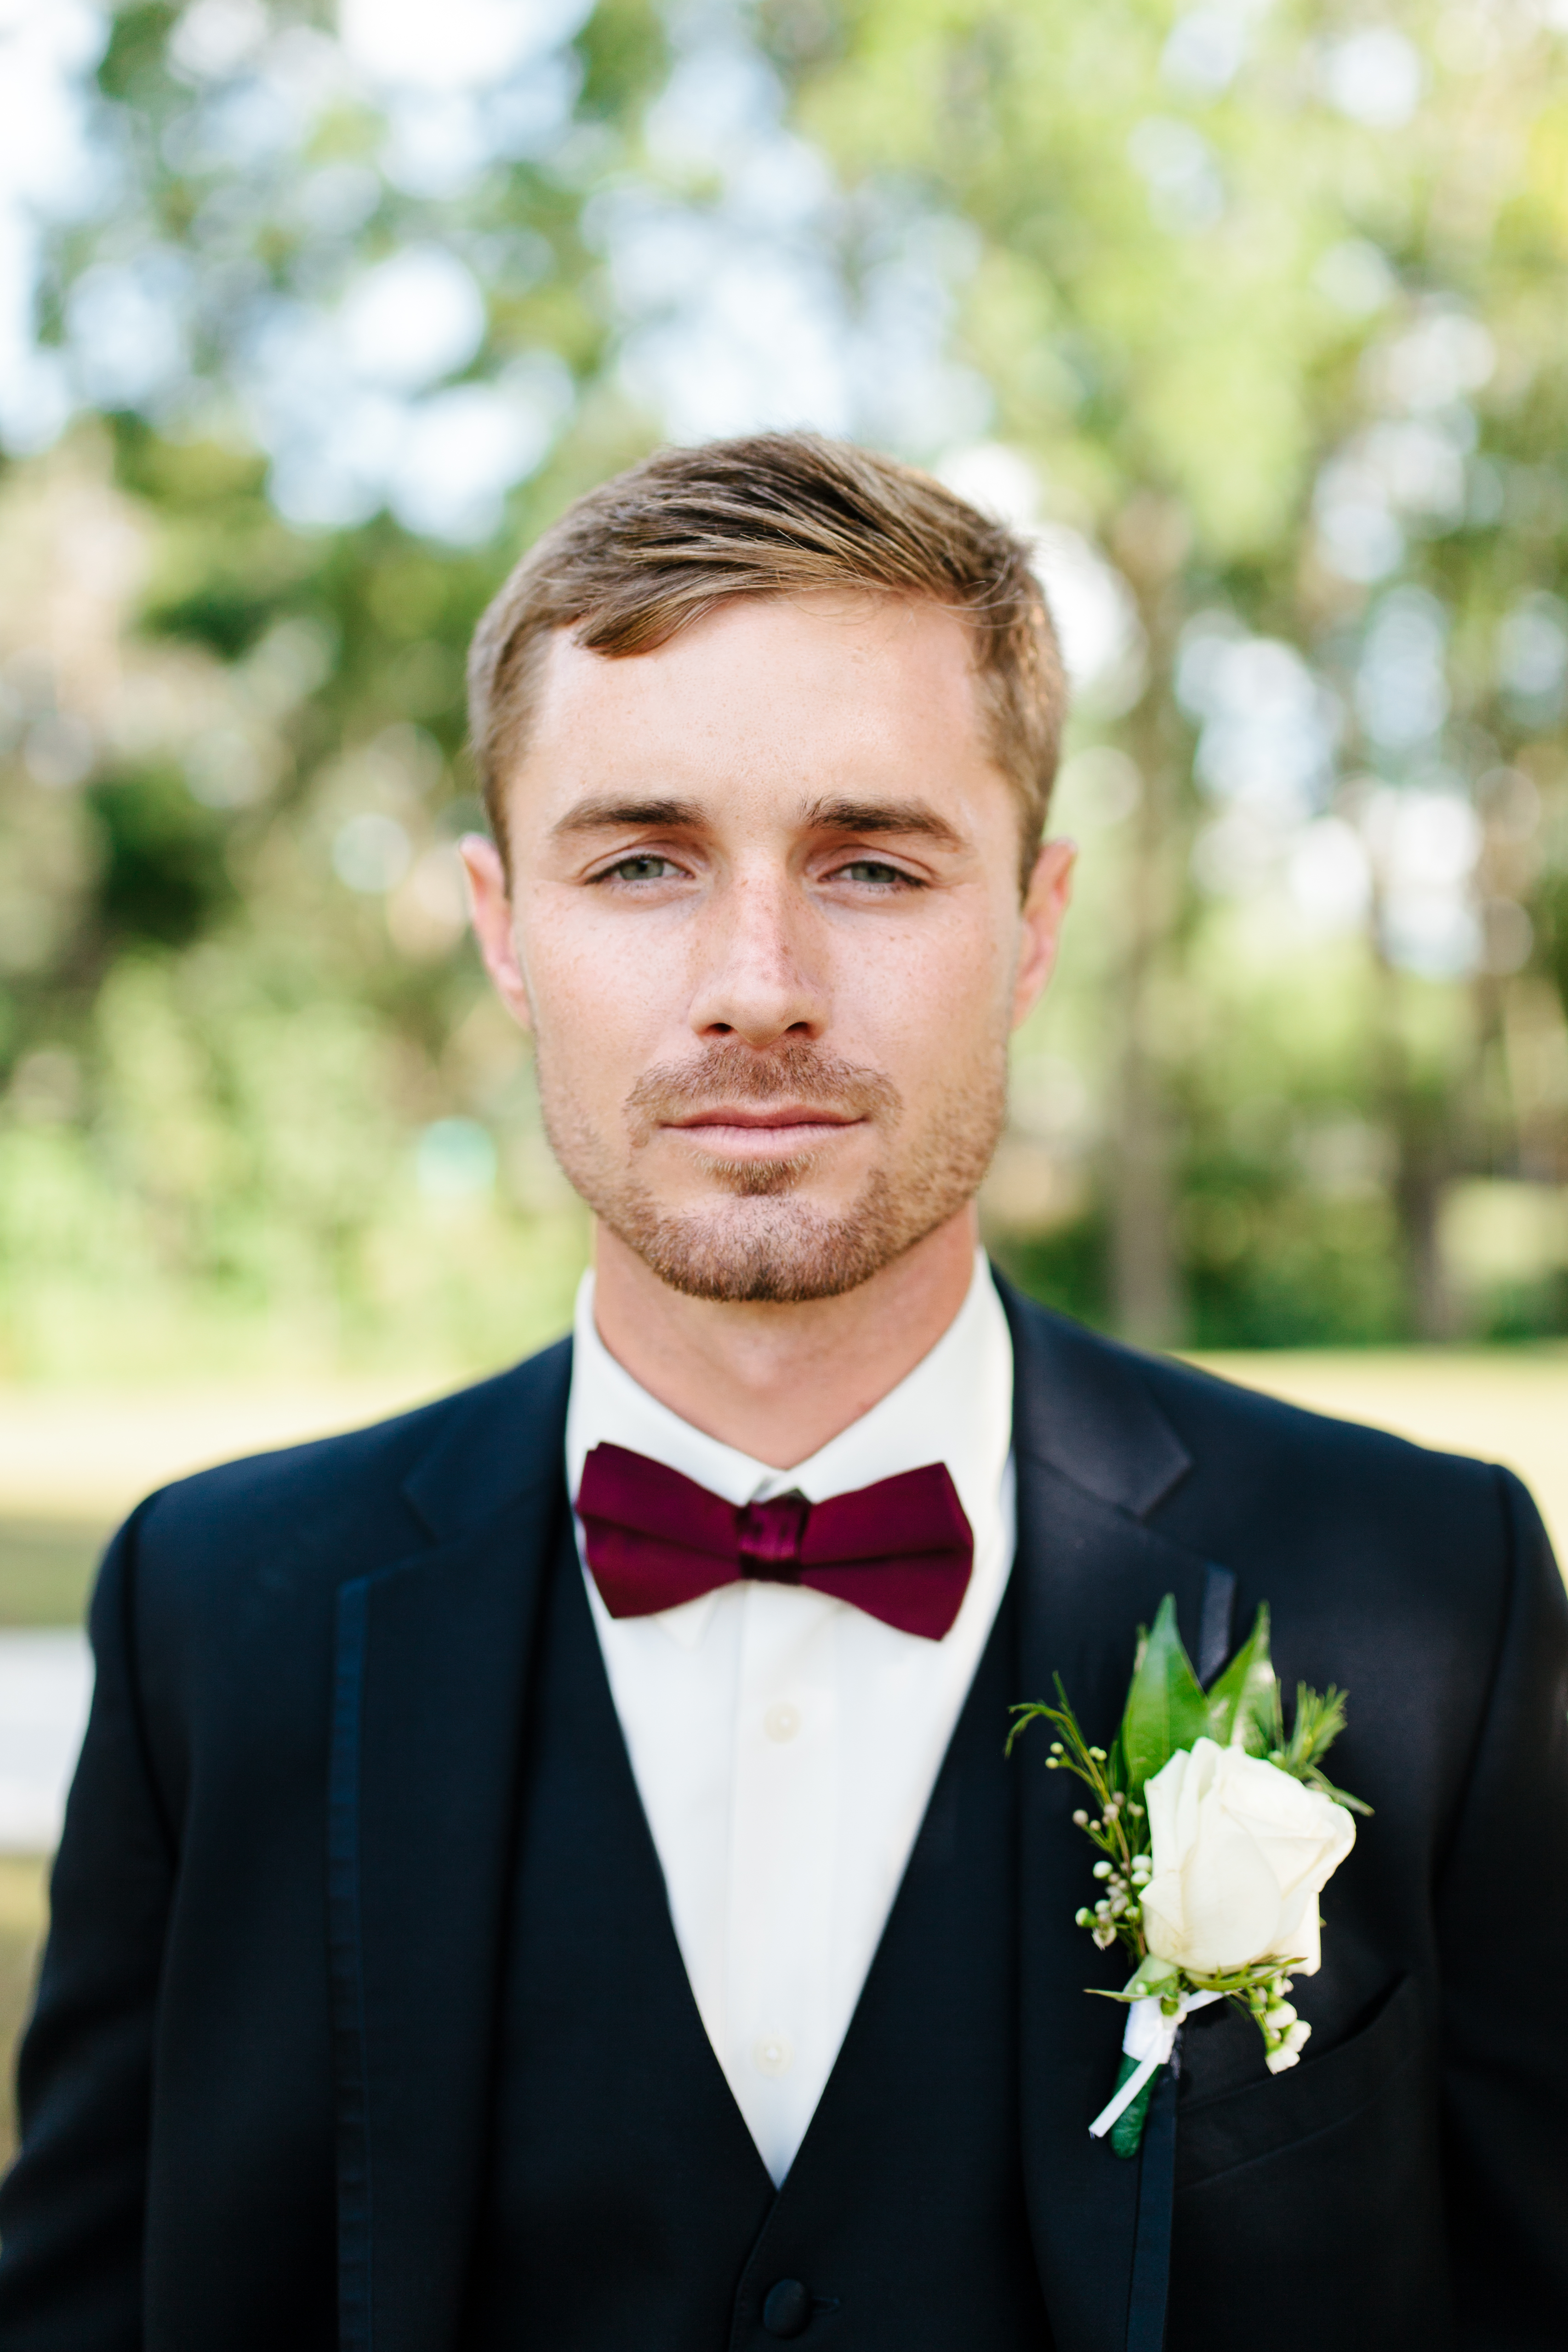 Stoic groom in navy and maroon bowtie portrait 